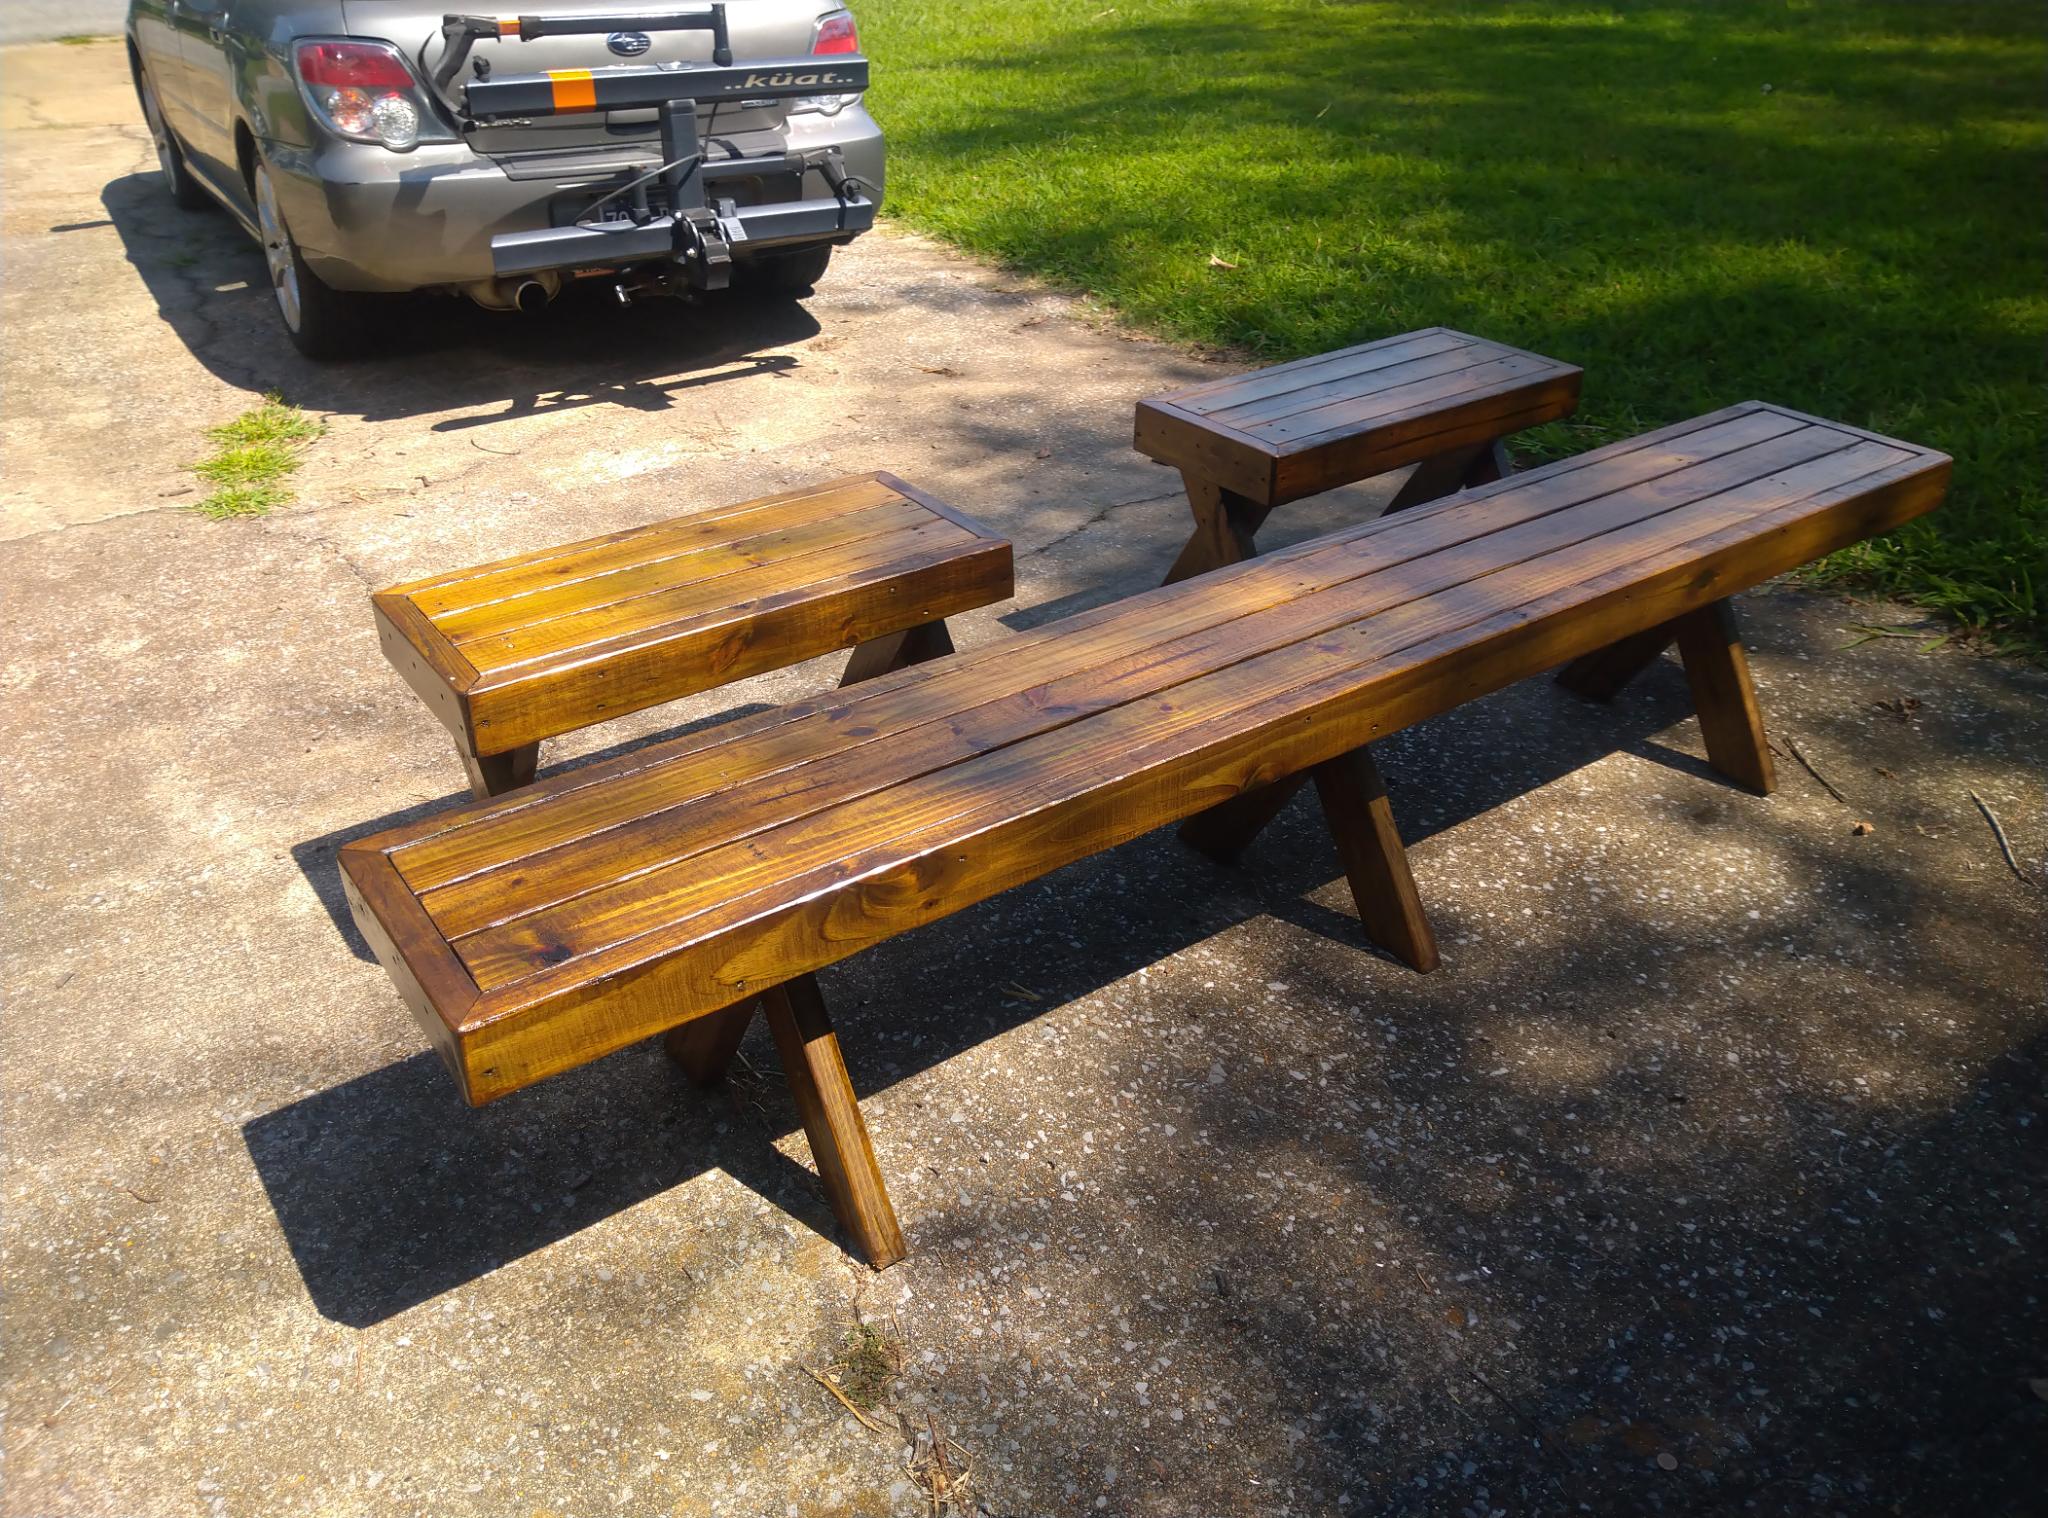 Three of the Finished Wooden Benches on a Concrete Driveway Behind My Car